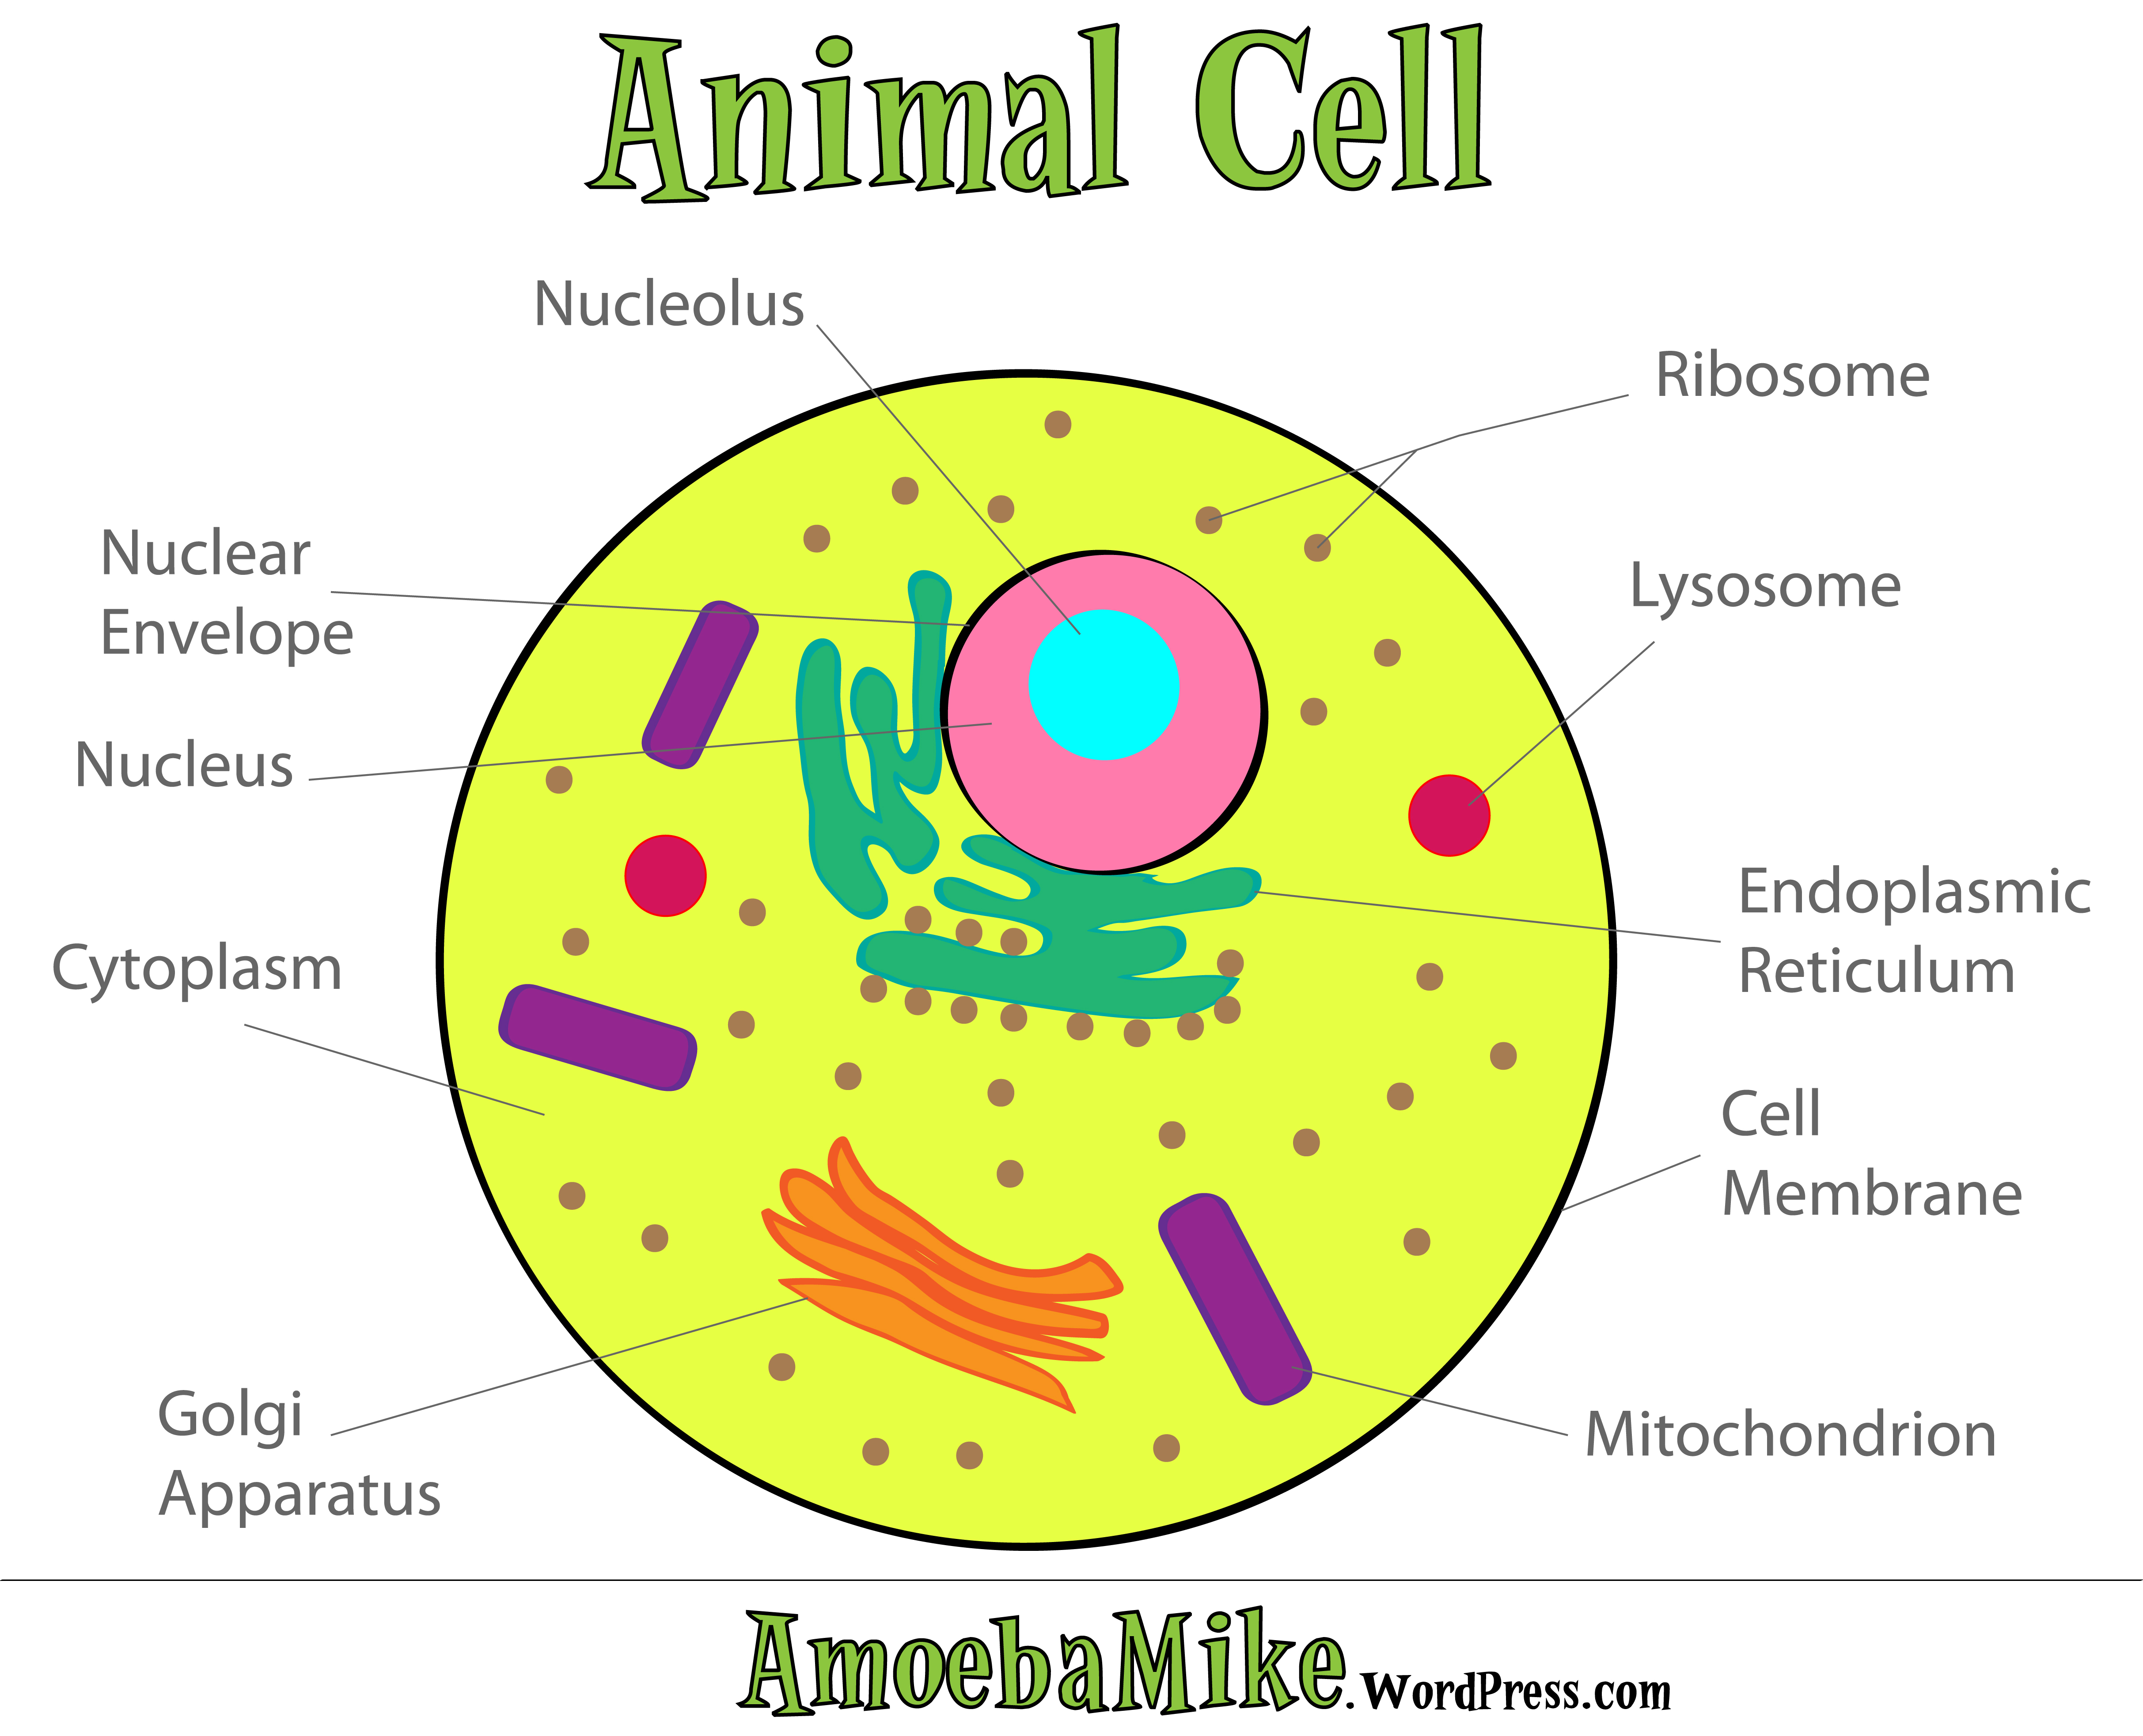 Diagram Of An Animal Cell The Cell Amoebamike